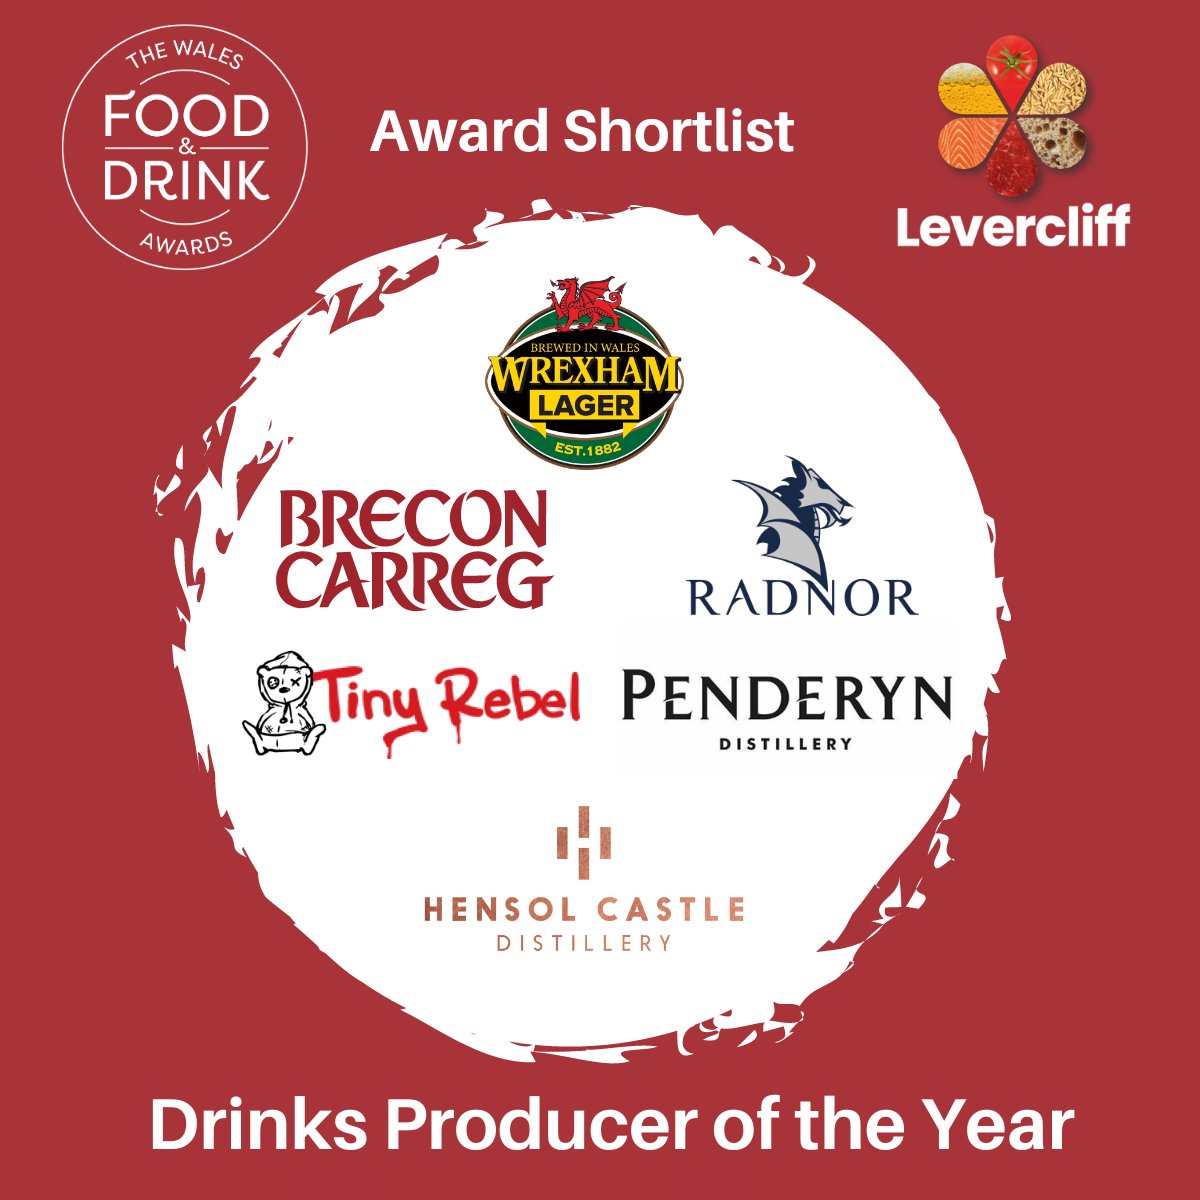 The anticipation is palpable🤩! We are excited for all entrants in #foodanddrinkawardswales but especially so for the shortlisted brands in the Drinks Producer category. Good luck @WXM_Lager @Radnorhills @tinyrebelbrewco @HC_Distillery @PenderynWhisky @BreconWater